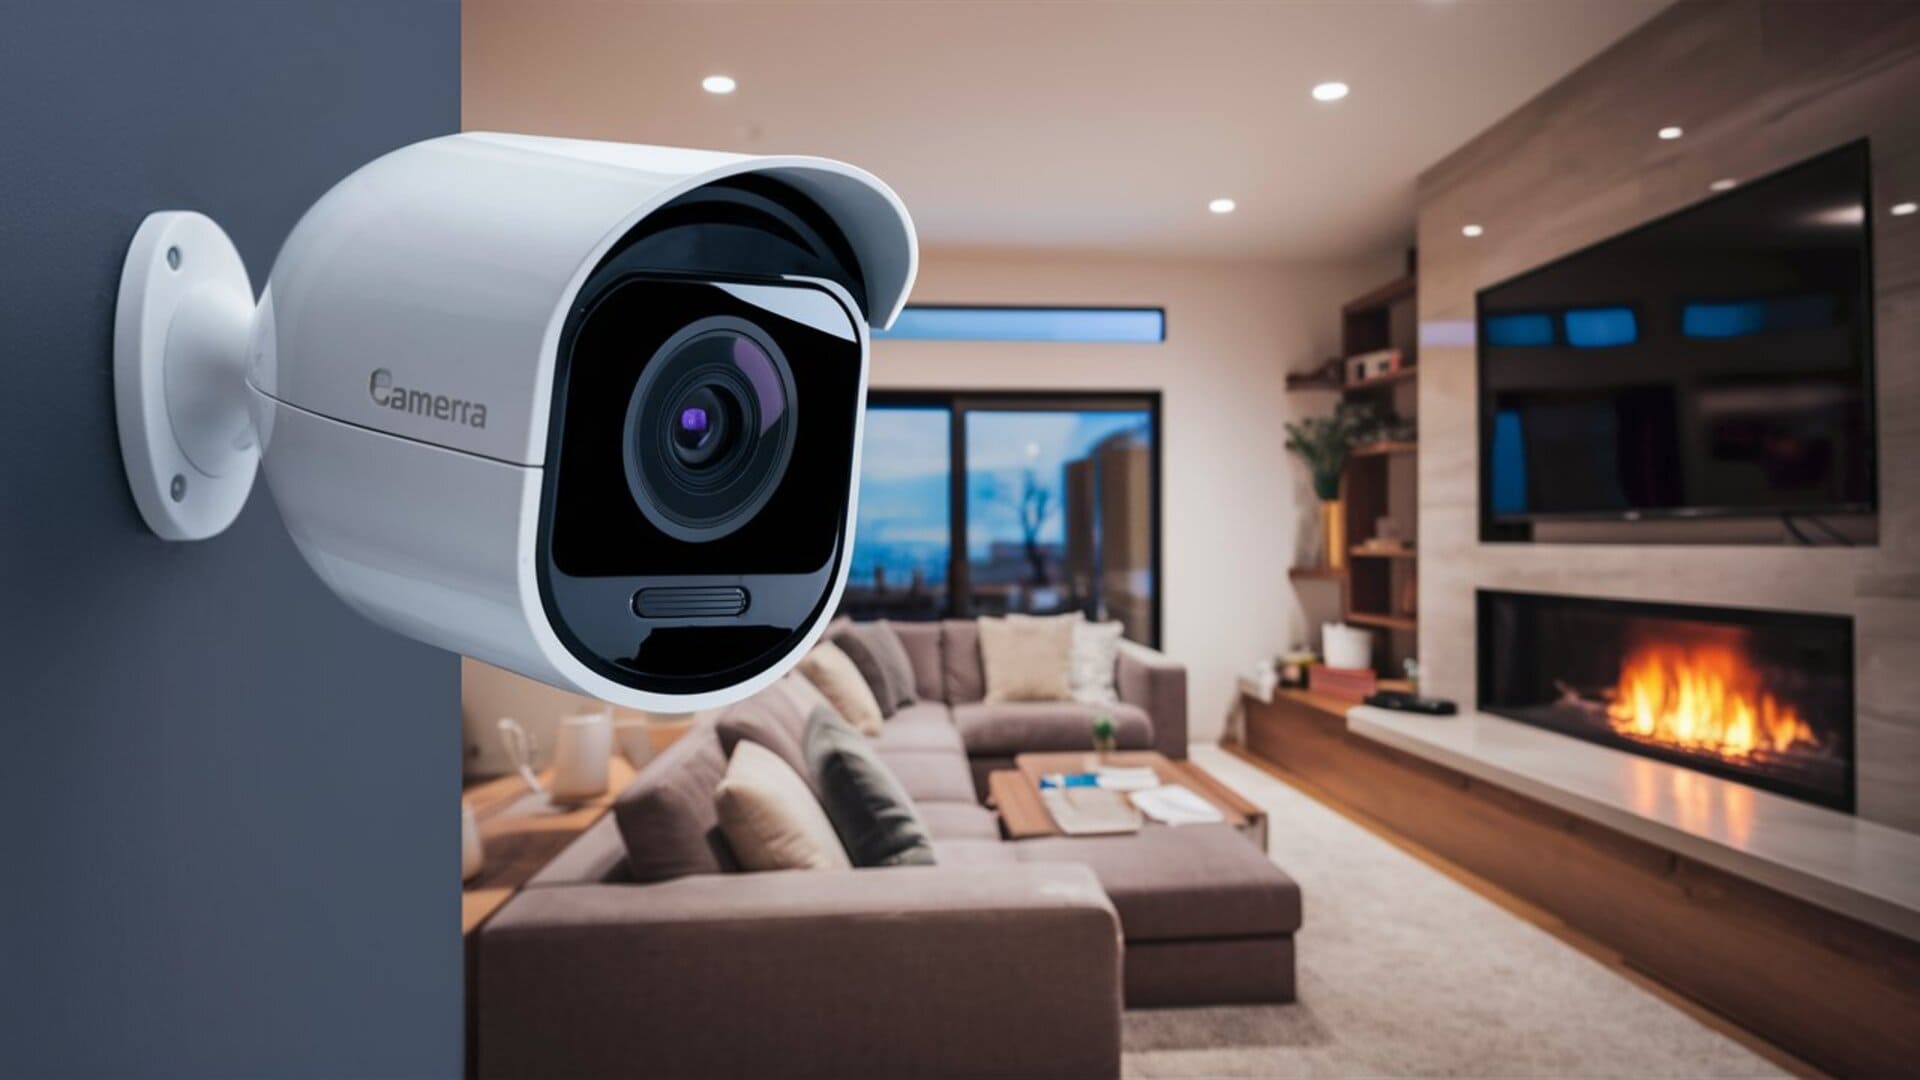 Ip camera; What Is IP Camera? Details About IP Camera For Proper Use!